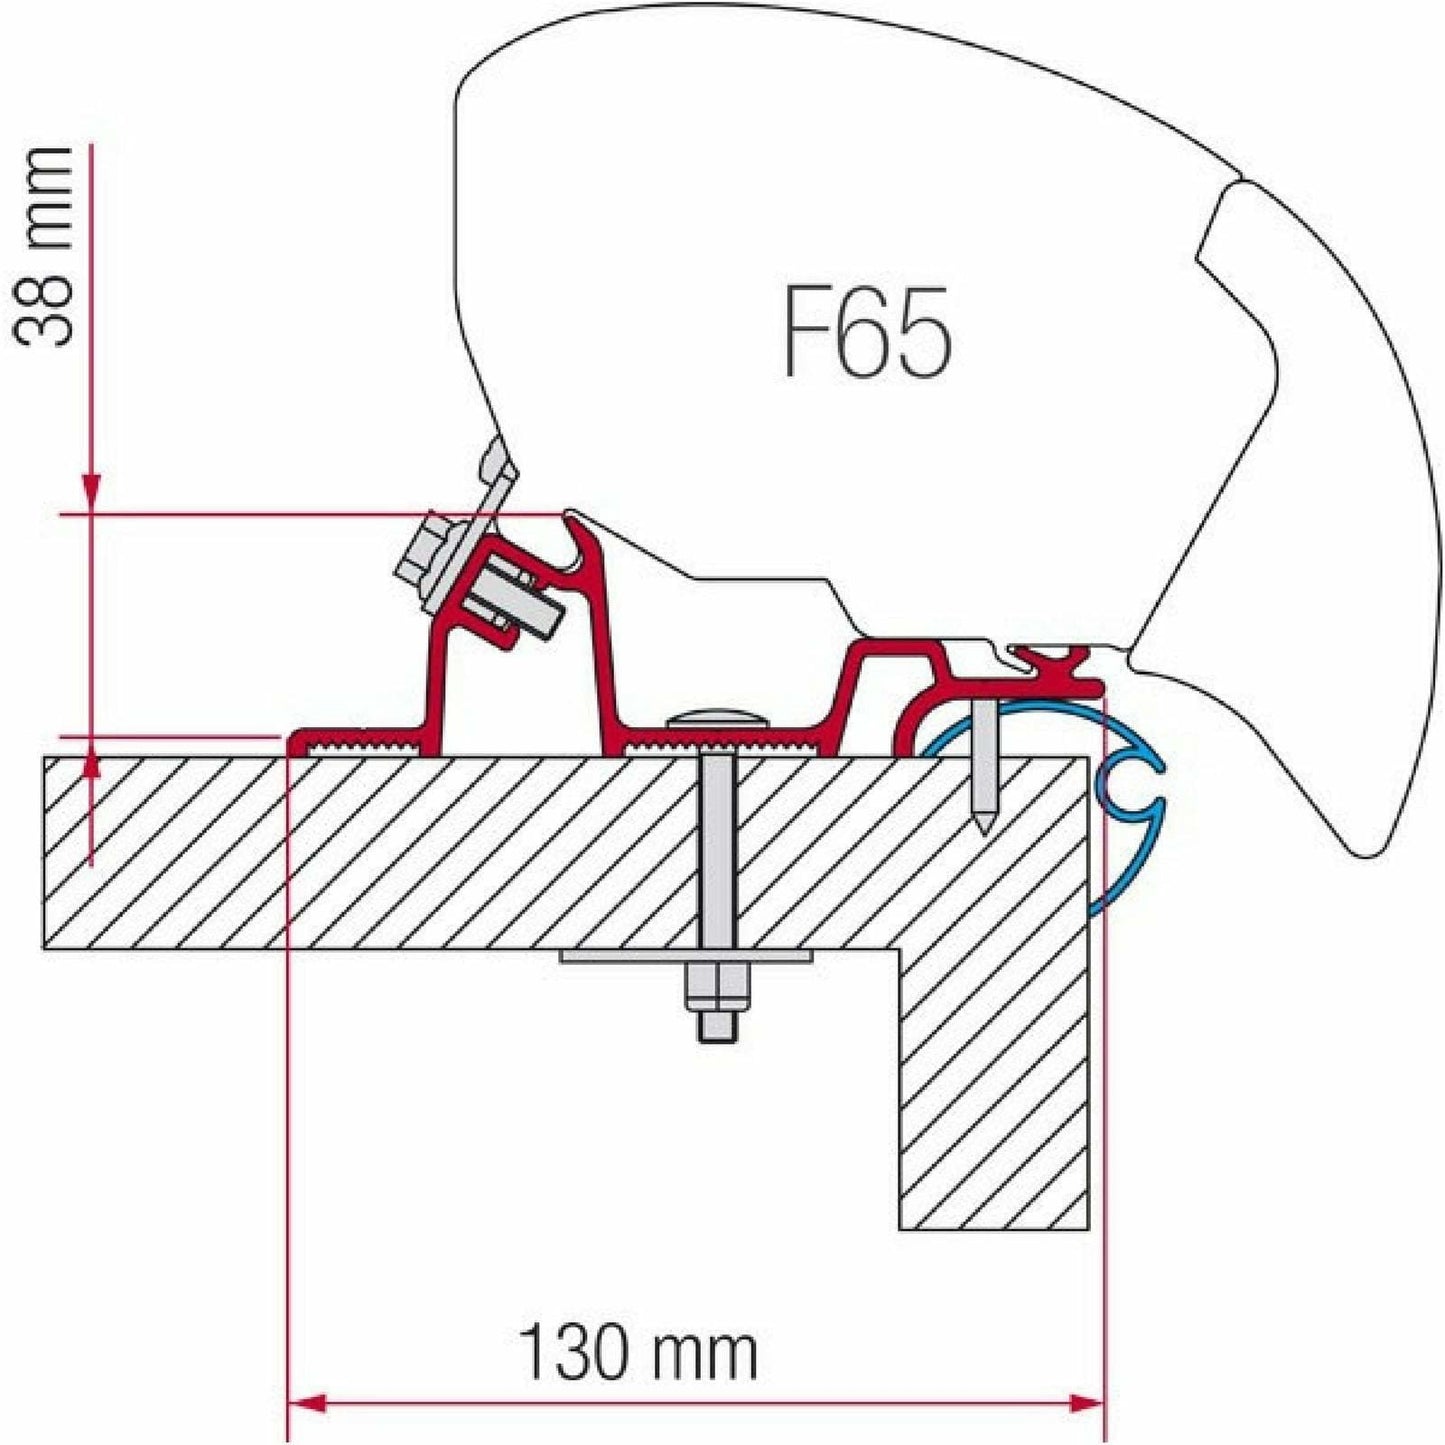 Fiamma Caravan Standard Awning Adapter Kit made by Fiamma. A Awning Adapter sold by Quality Caravan Awnings